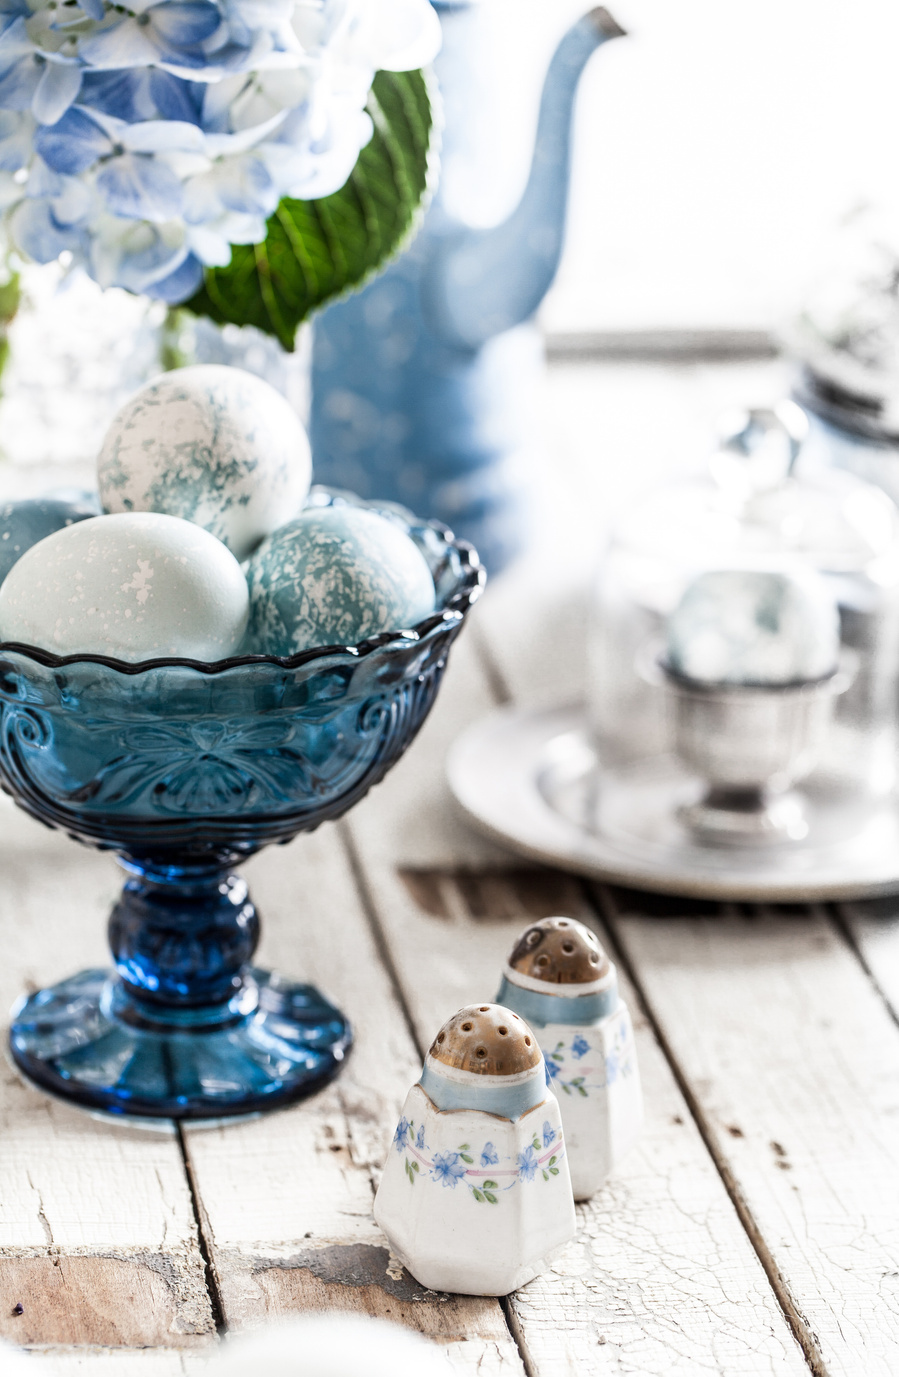 Styled blue glass dish with blue and white dyed eggs on a white wood surface with blue hydrangeas, a tea set, and salt and pepper on the table. Final result of diy dyed eggs photography 